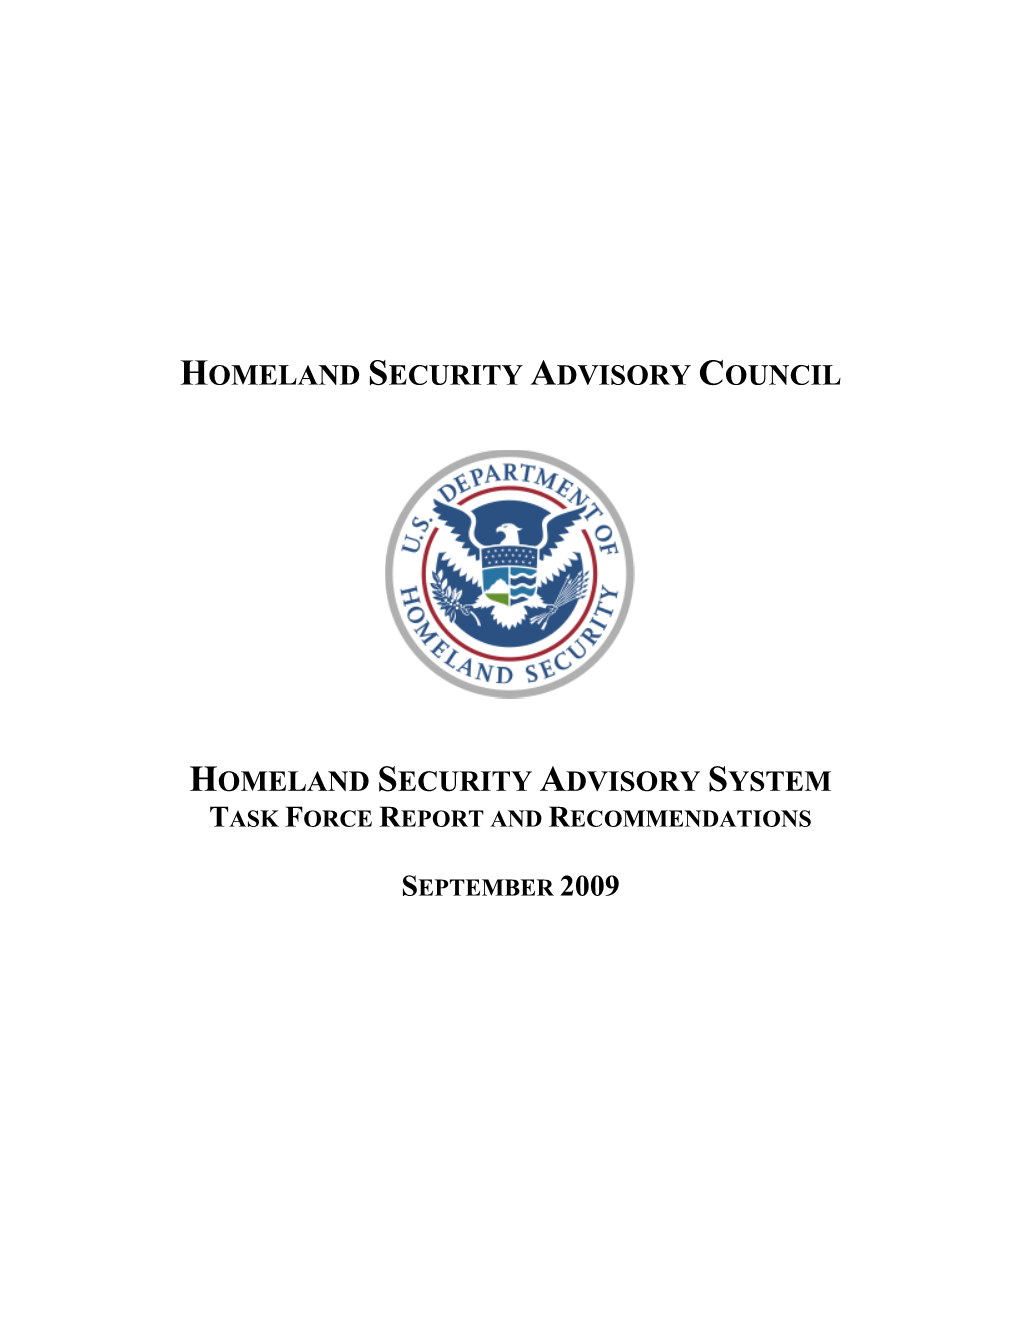 Homeland Security Advisory System Task Force Report and Recommendations